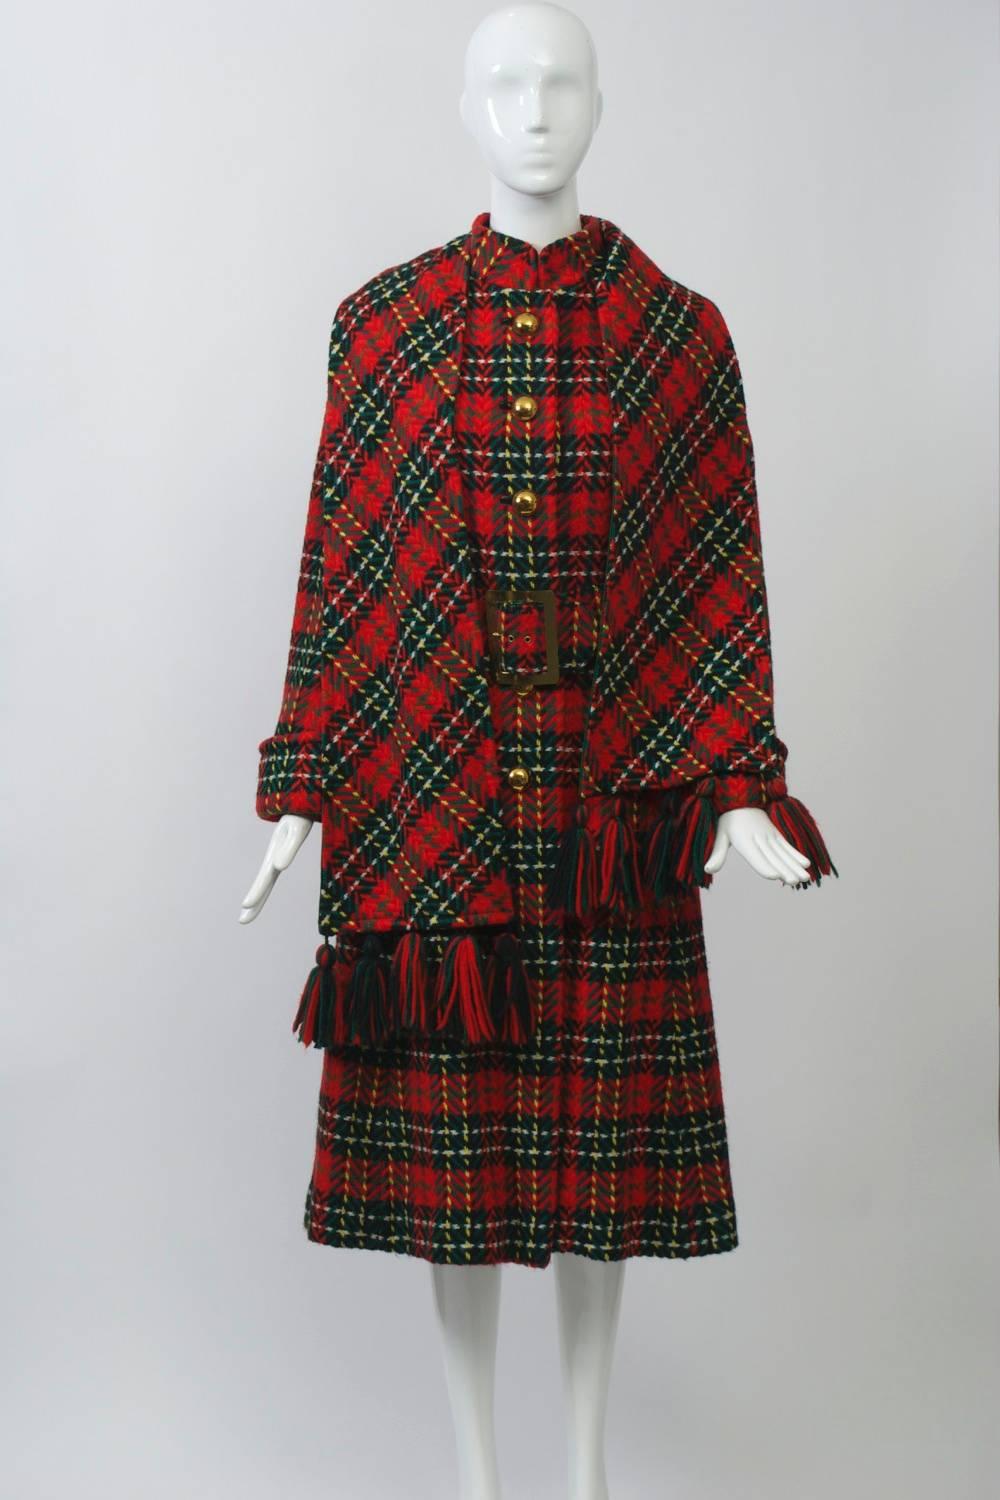 Wonderful red plaid coat featuring a wide belt, mandarin collar, and turn-back cuffs, accented with a fringed scarf. Fitted bodice, slight A-line skirt. Lined in green crepe. Excellent condition. Size S.